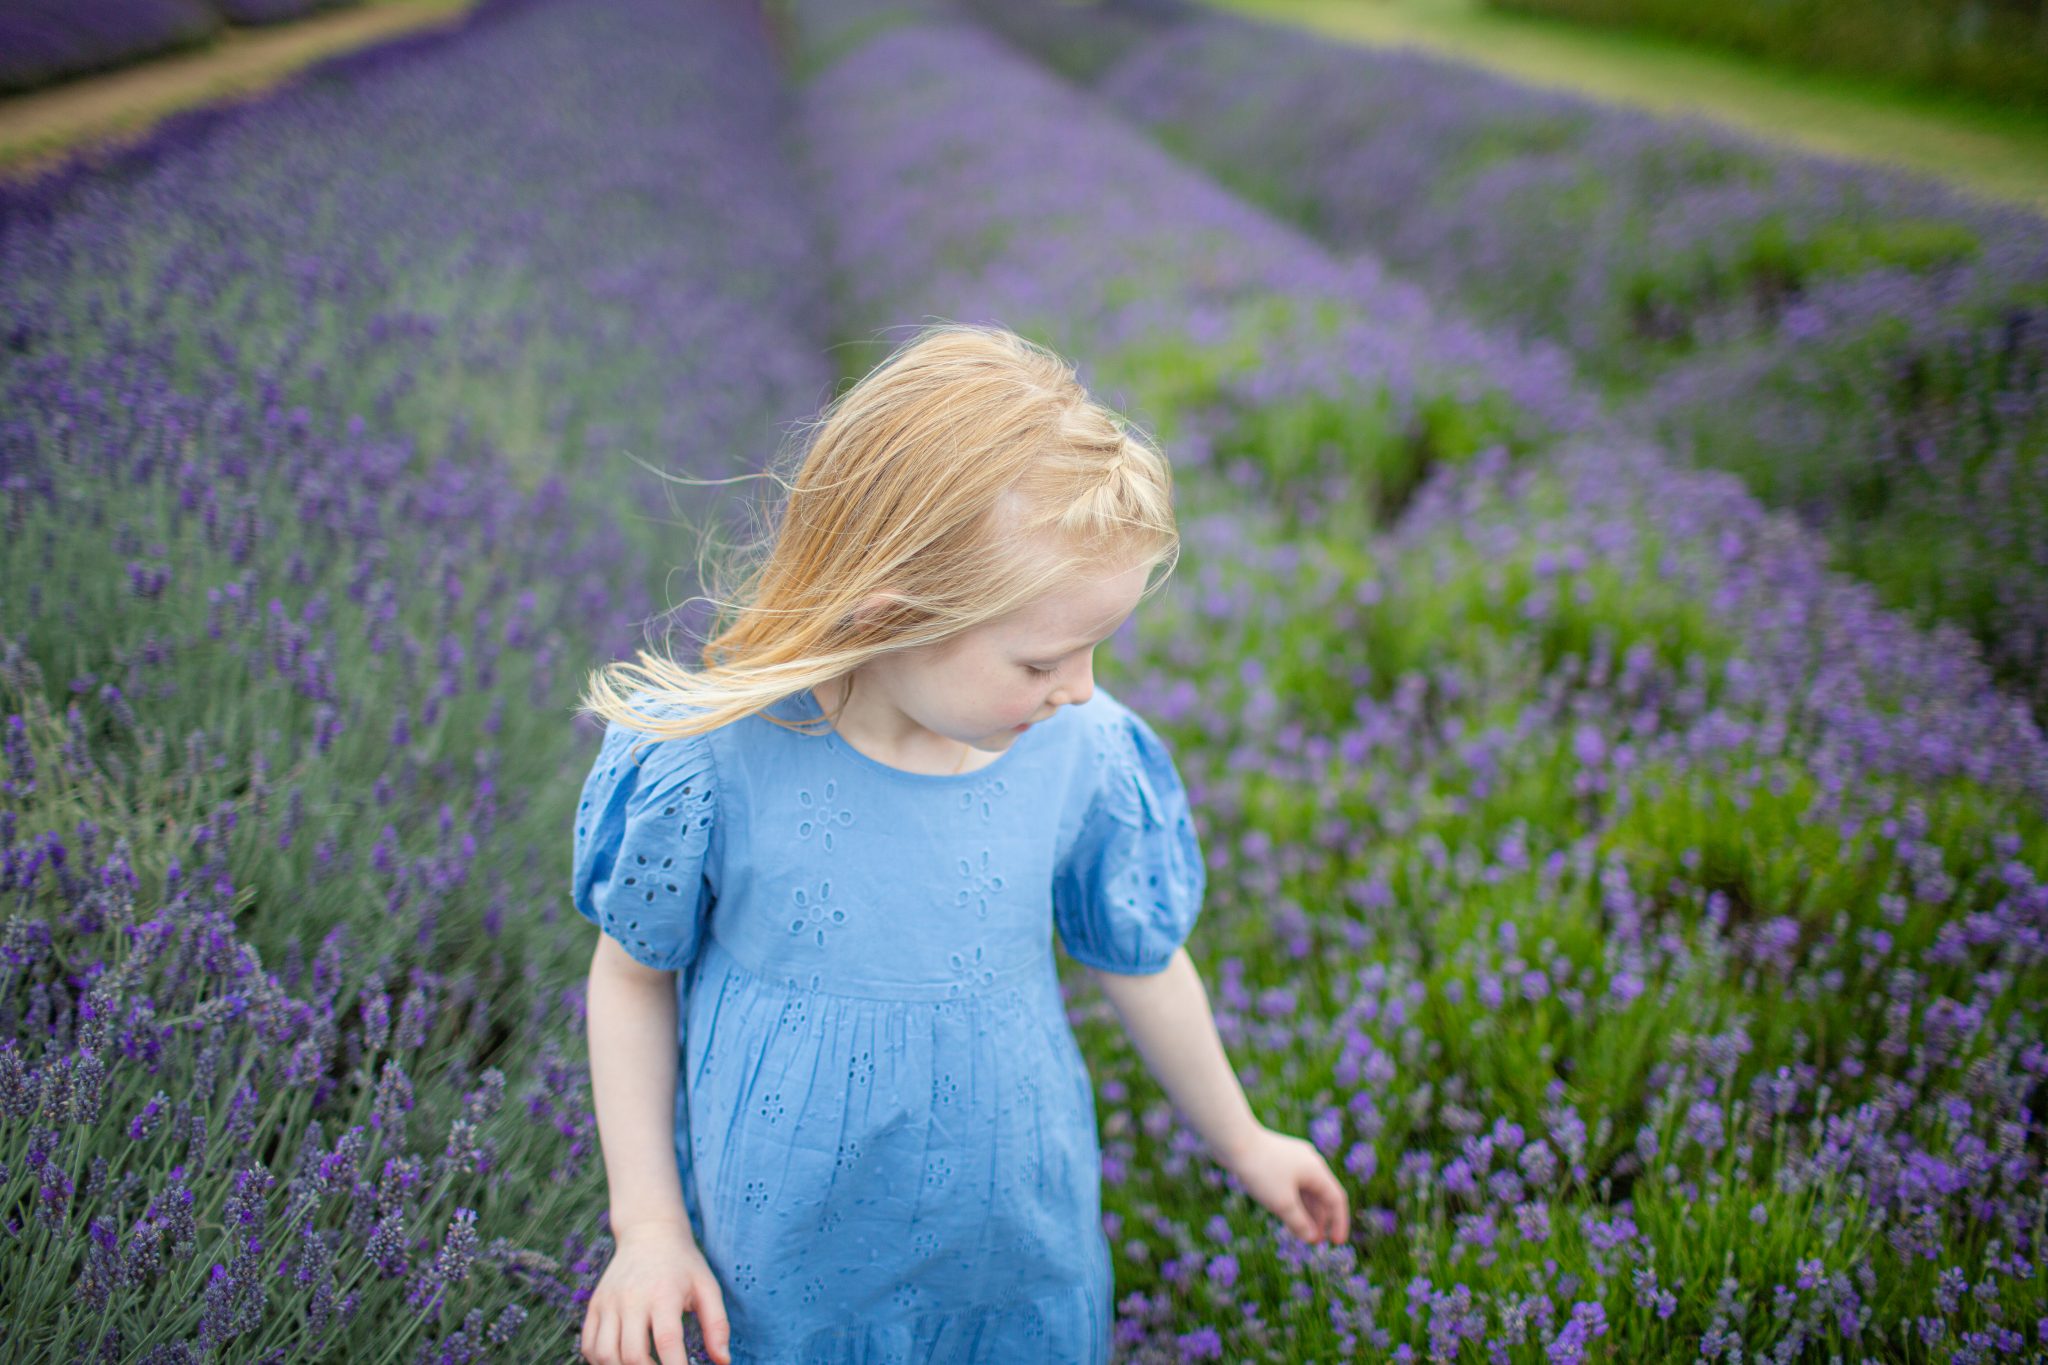 Family Shoot at Lavender Fields.